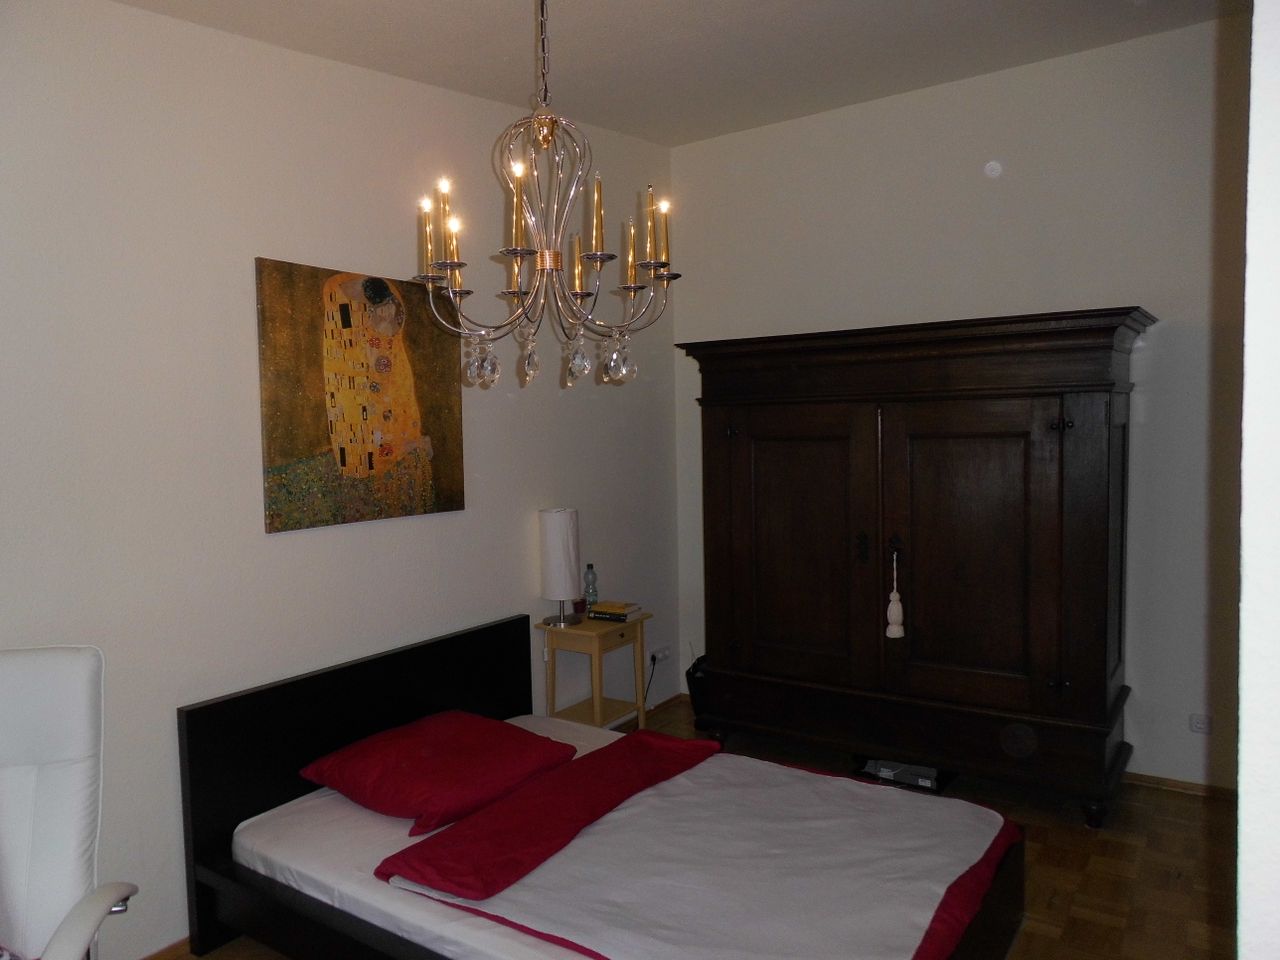 Top apartment in absolute prime location in the center of Leipzig: in 10 minutes walk through the Clara Park in the city center (WE16)